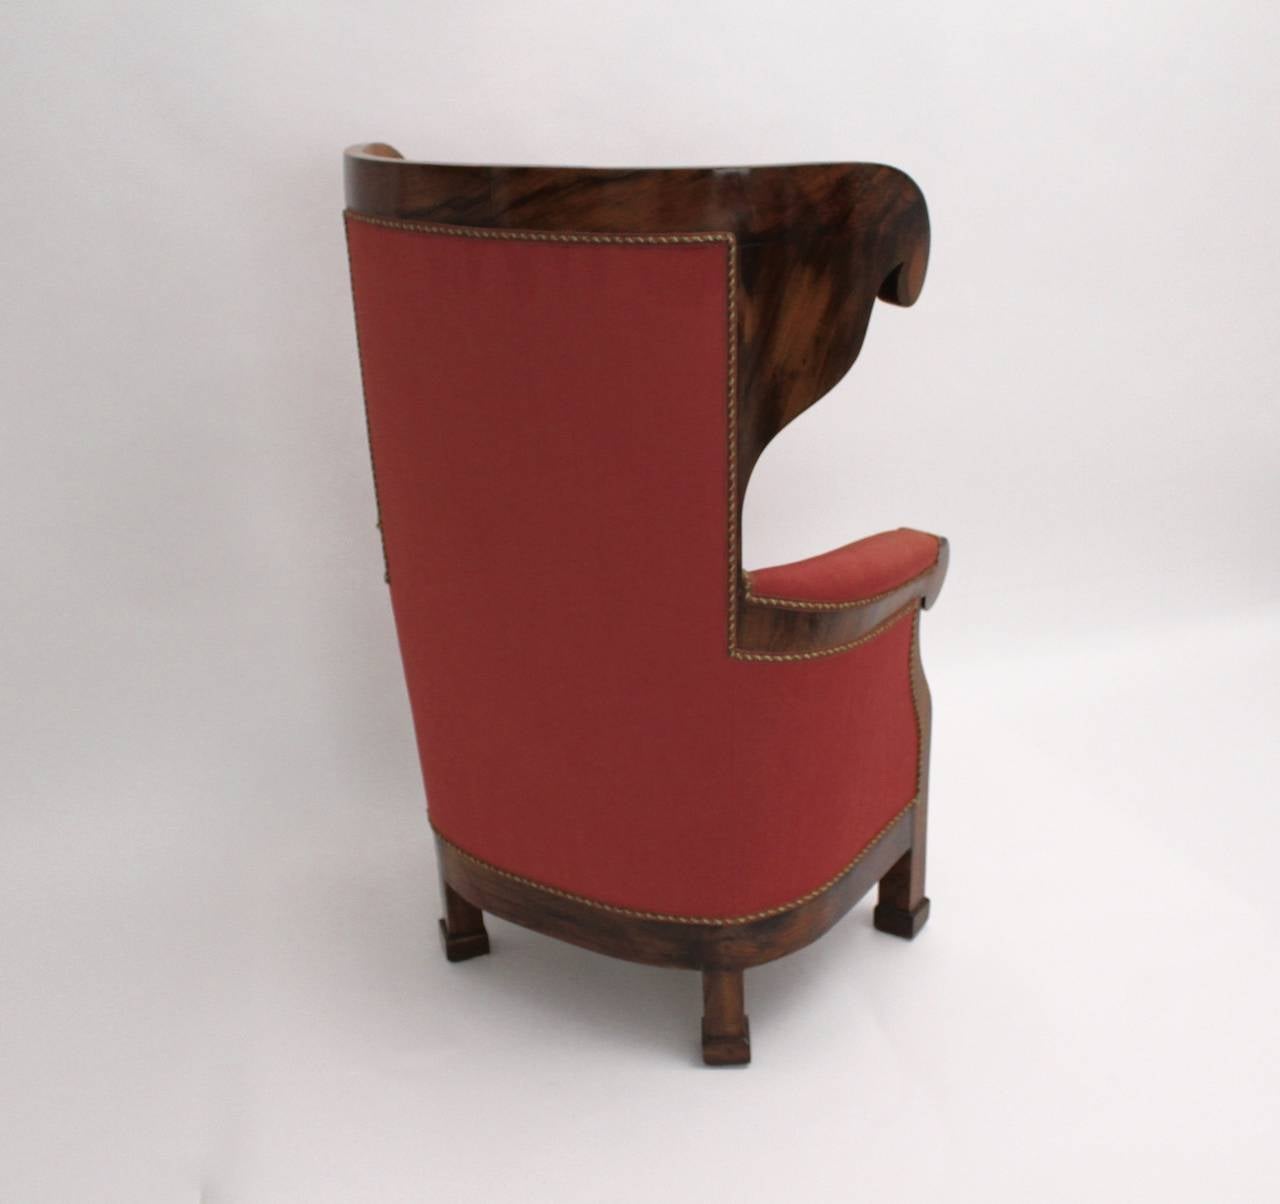 Wonderful Viennese Biedermeier wingback chair designed and made circa 1825.
This wingback chair is walnut veneered and carefully hand polished.
Also the seat is covered with pink moiré fabric.

The wingback chair shows very good vintage